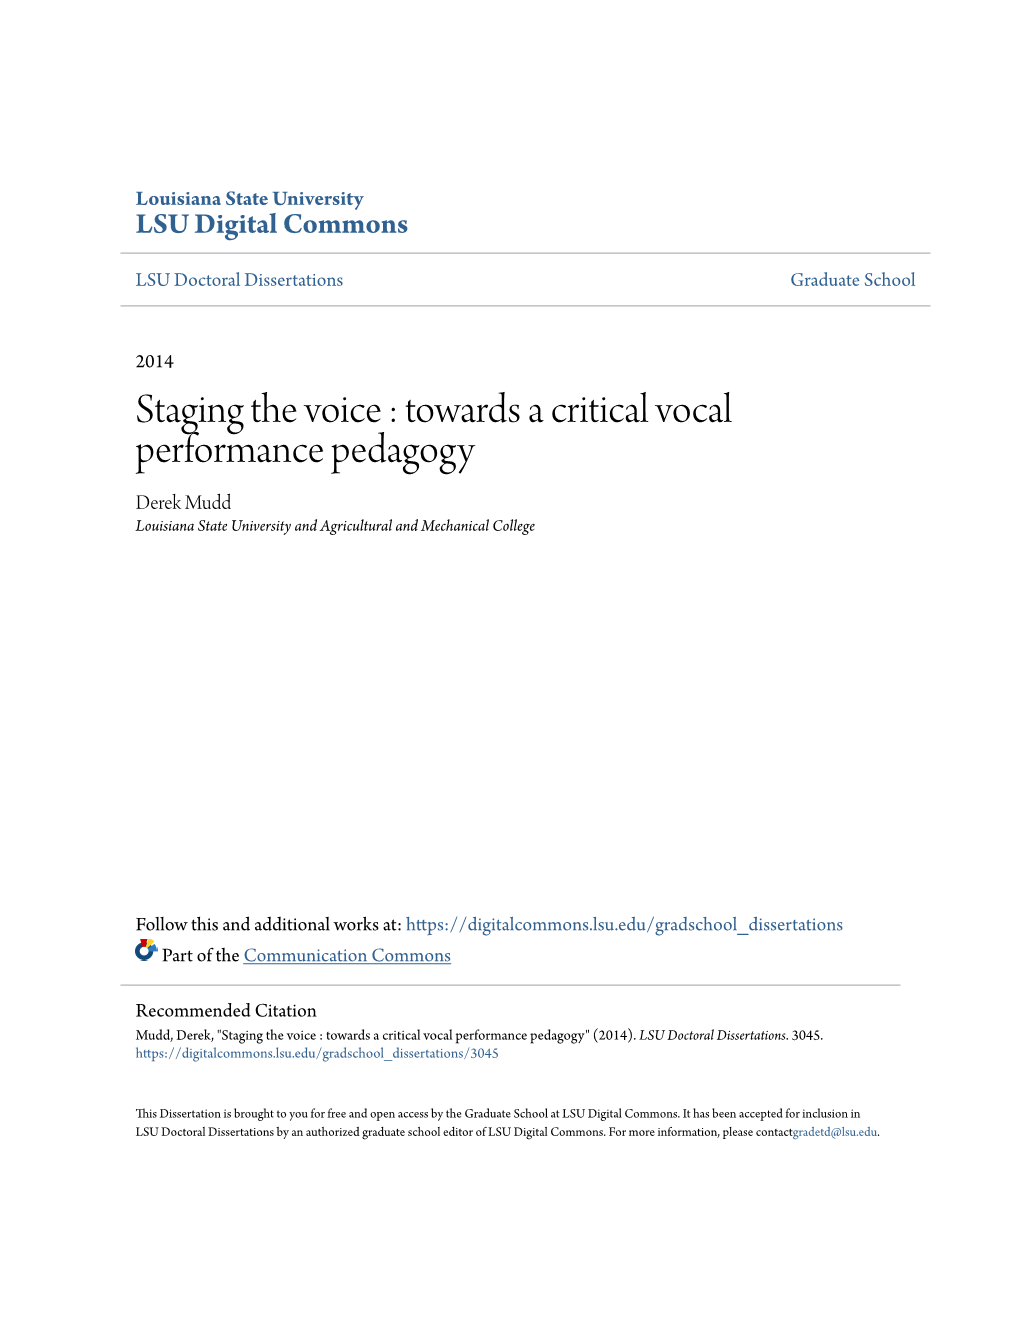 Staging the Voice : Towards a Critical Vocal Performance Pedagogy Derek Mudd Louisiana State University and Agricultural and Mechanical College